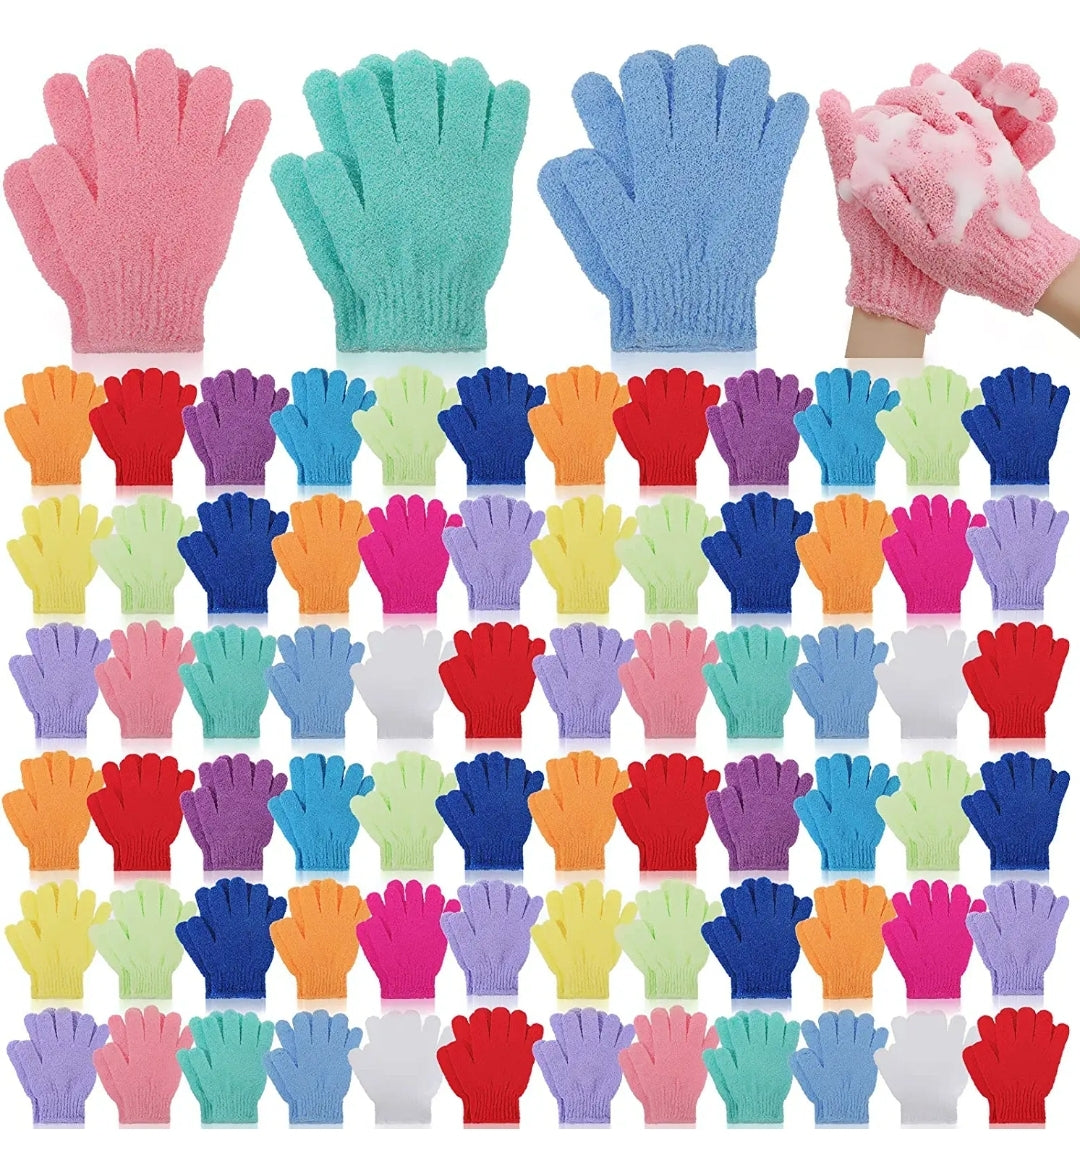 Exfoliating Shower Gloves Diana's Candles and Soaps 